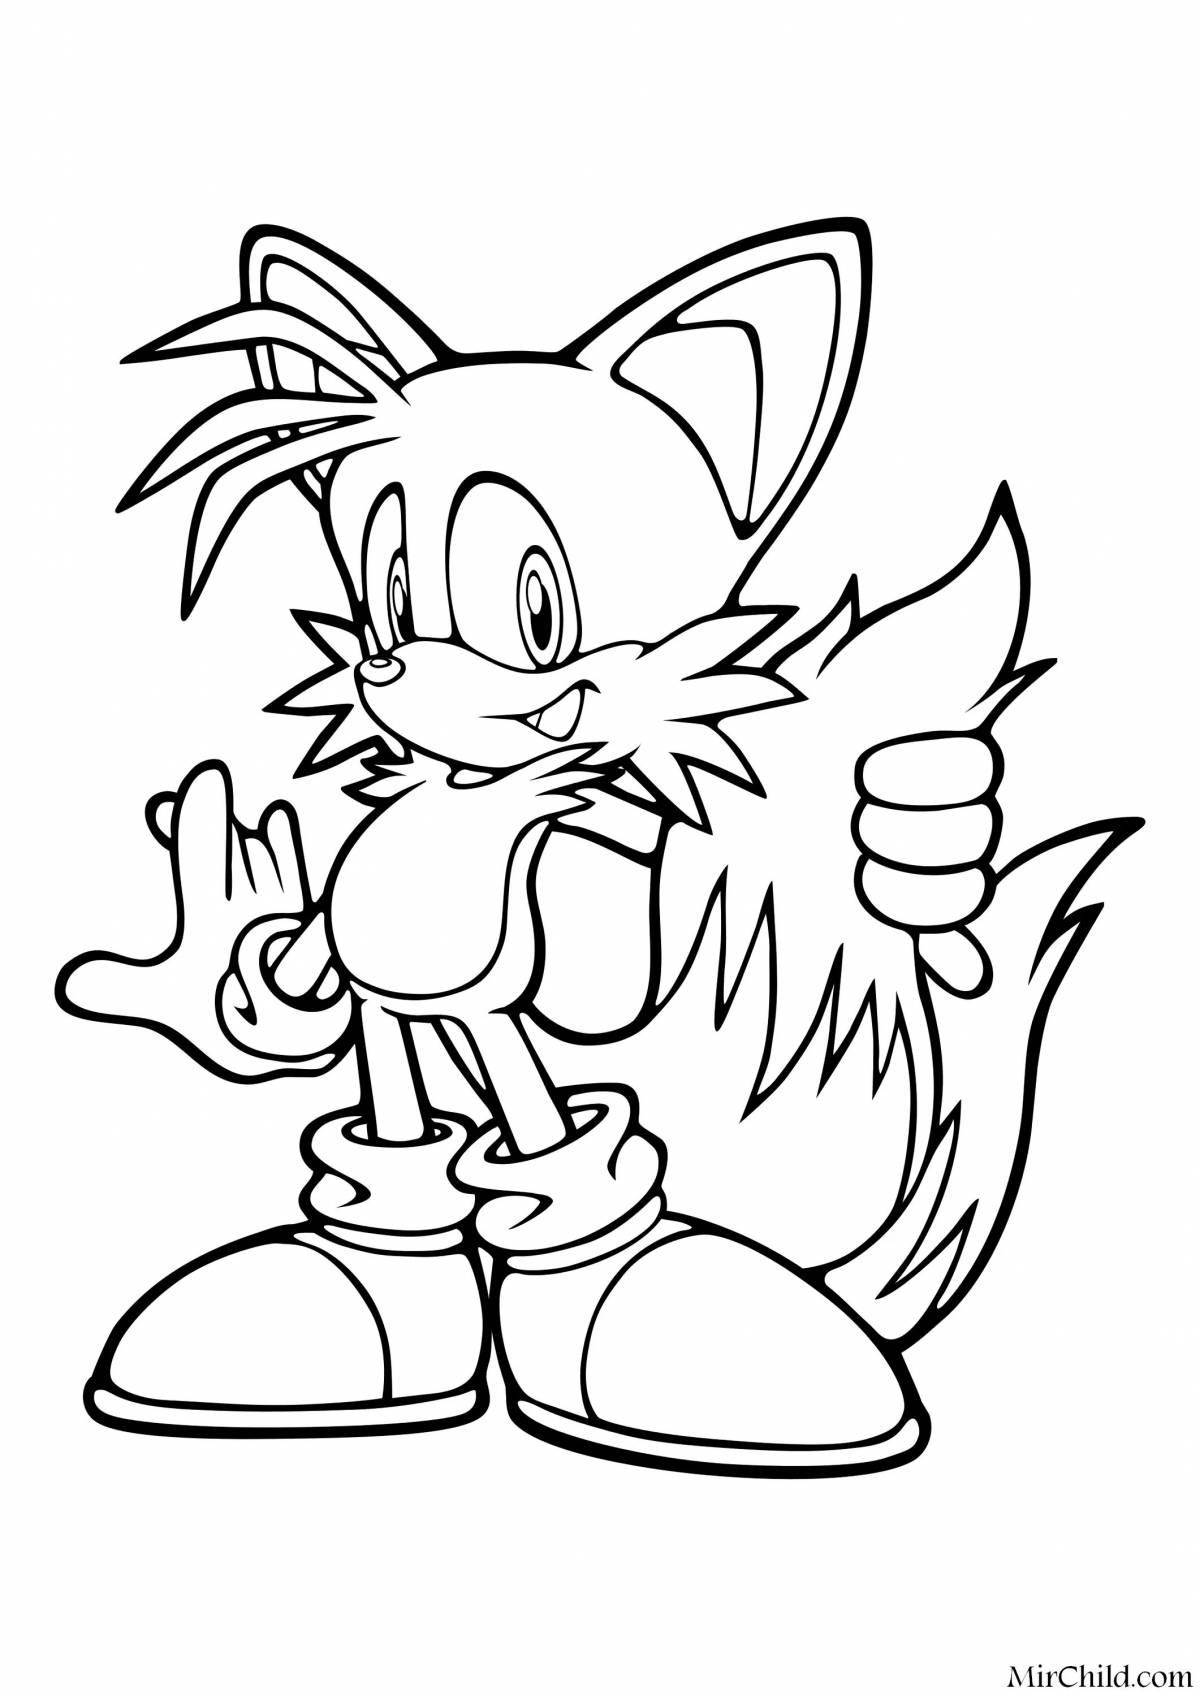 Xs sonic bright coloring page